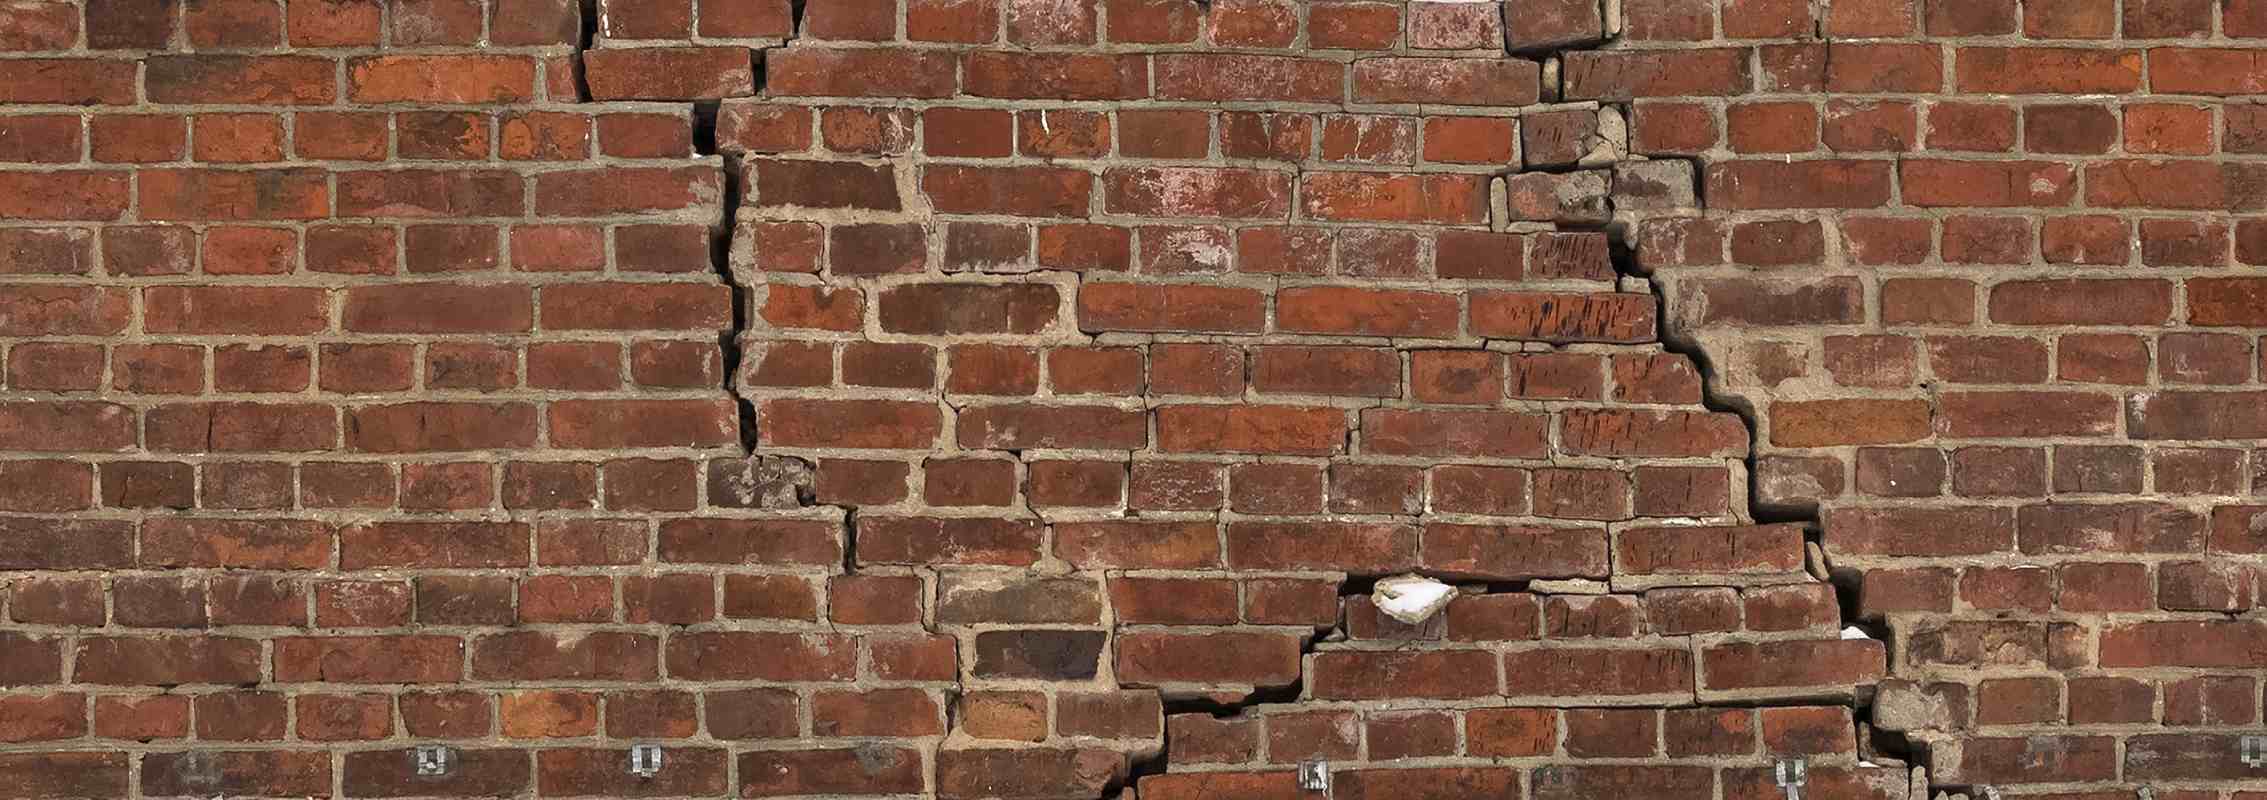 Causes Of Bowed Walls